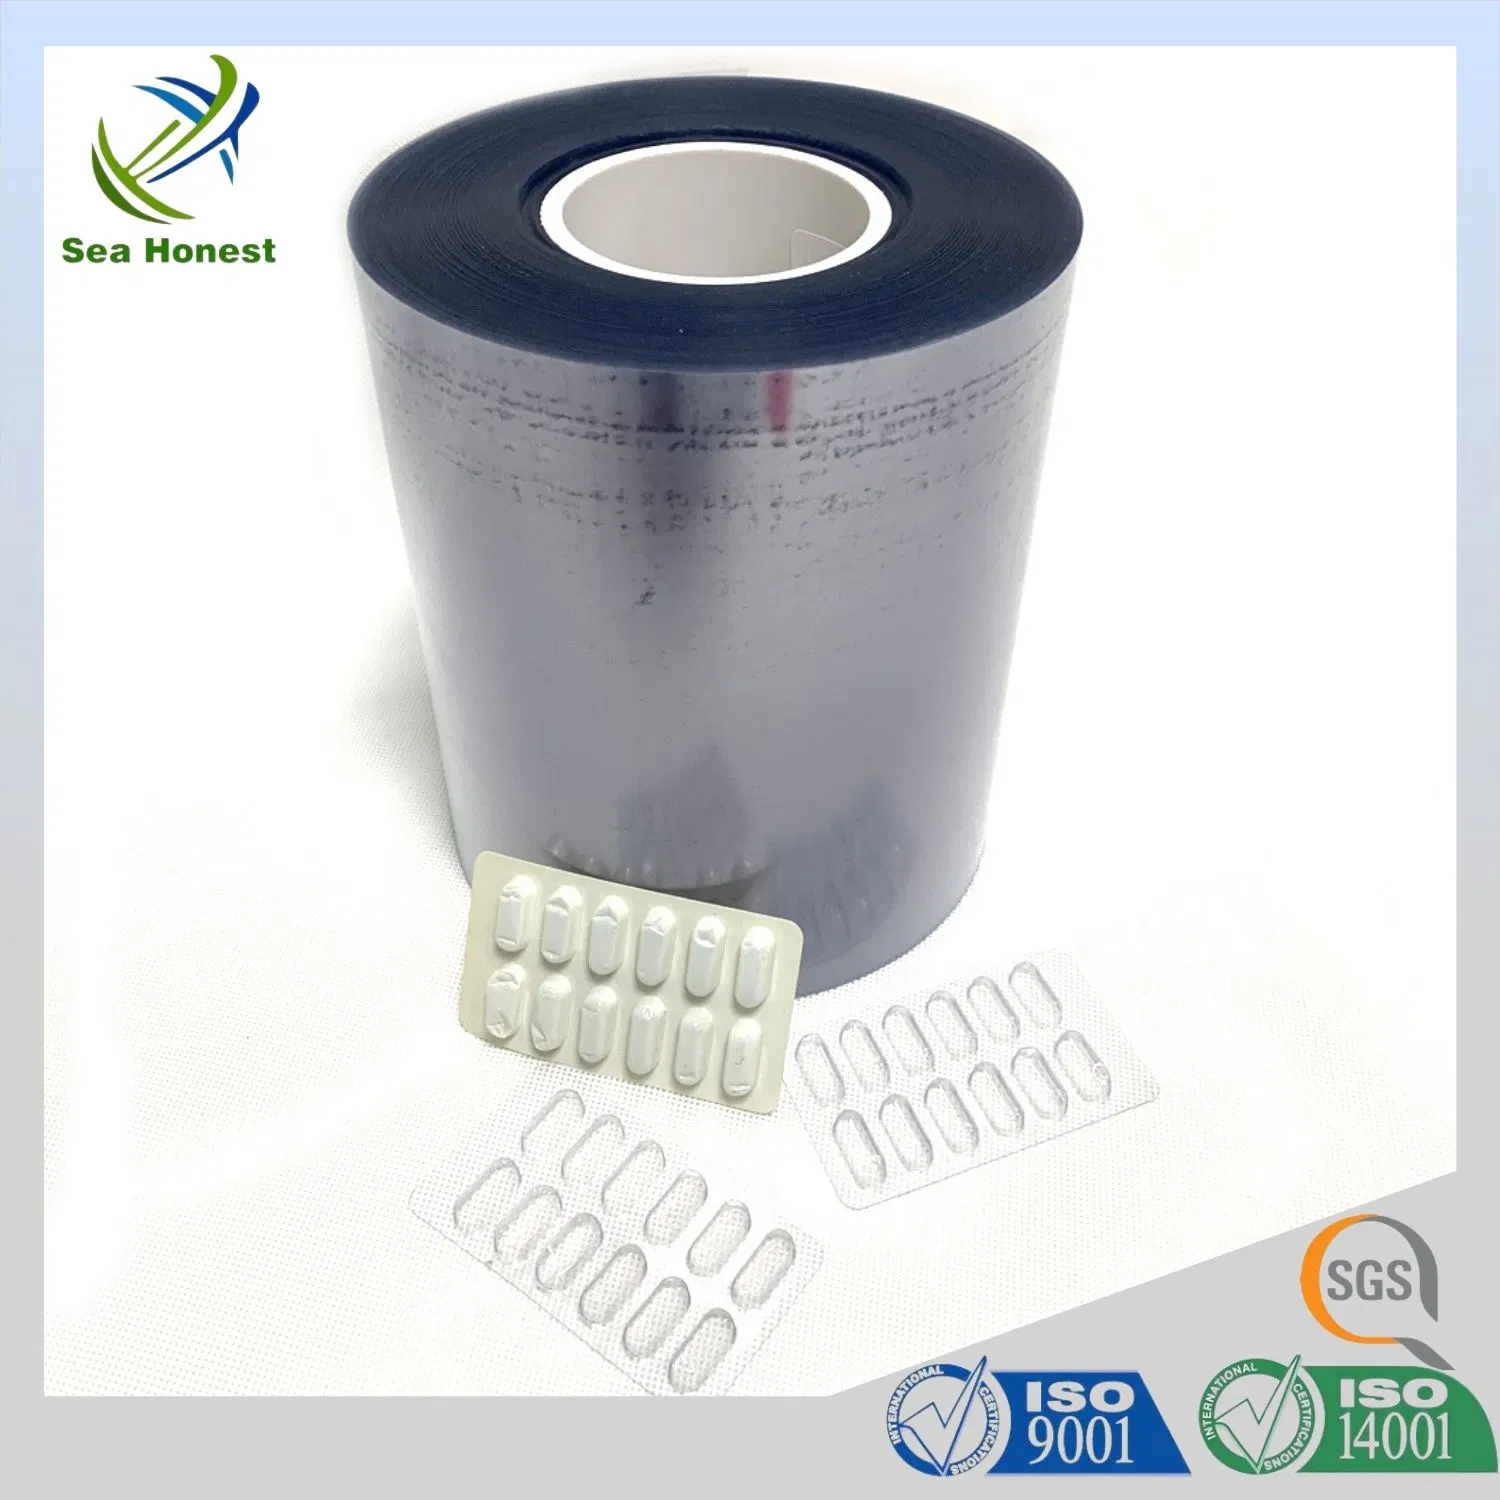 Clear and Colorful 0.25mm PVC Pharmaceutical Rigid Film for Blister Packaging